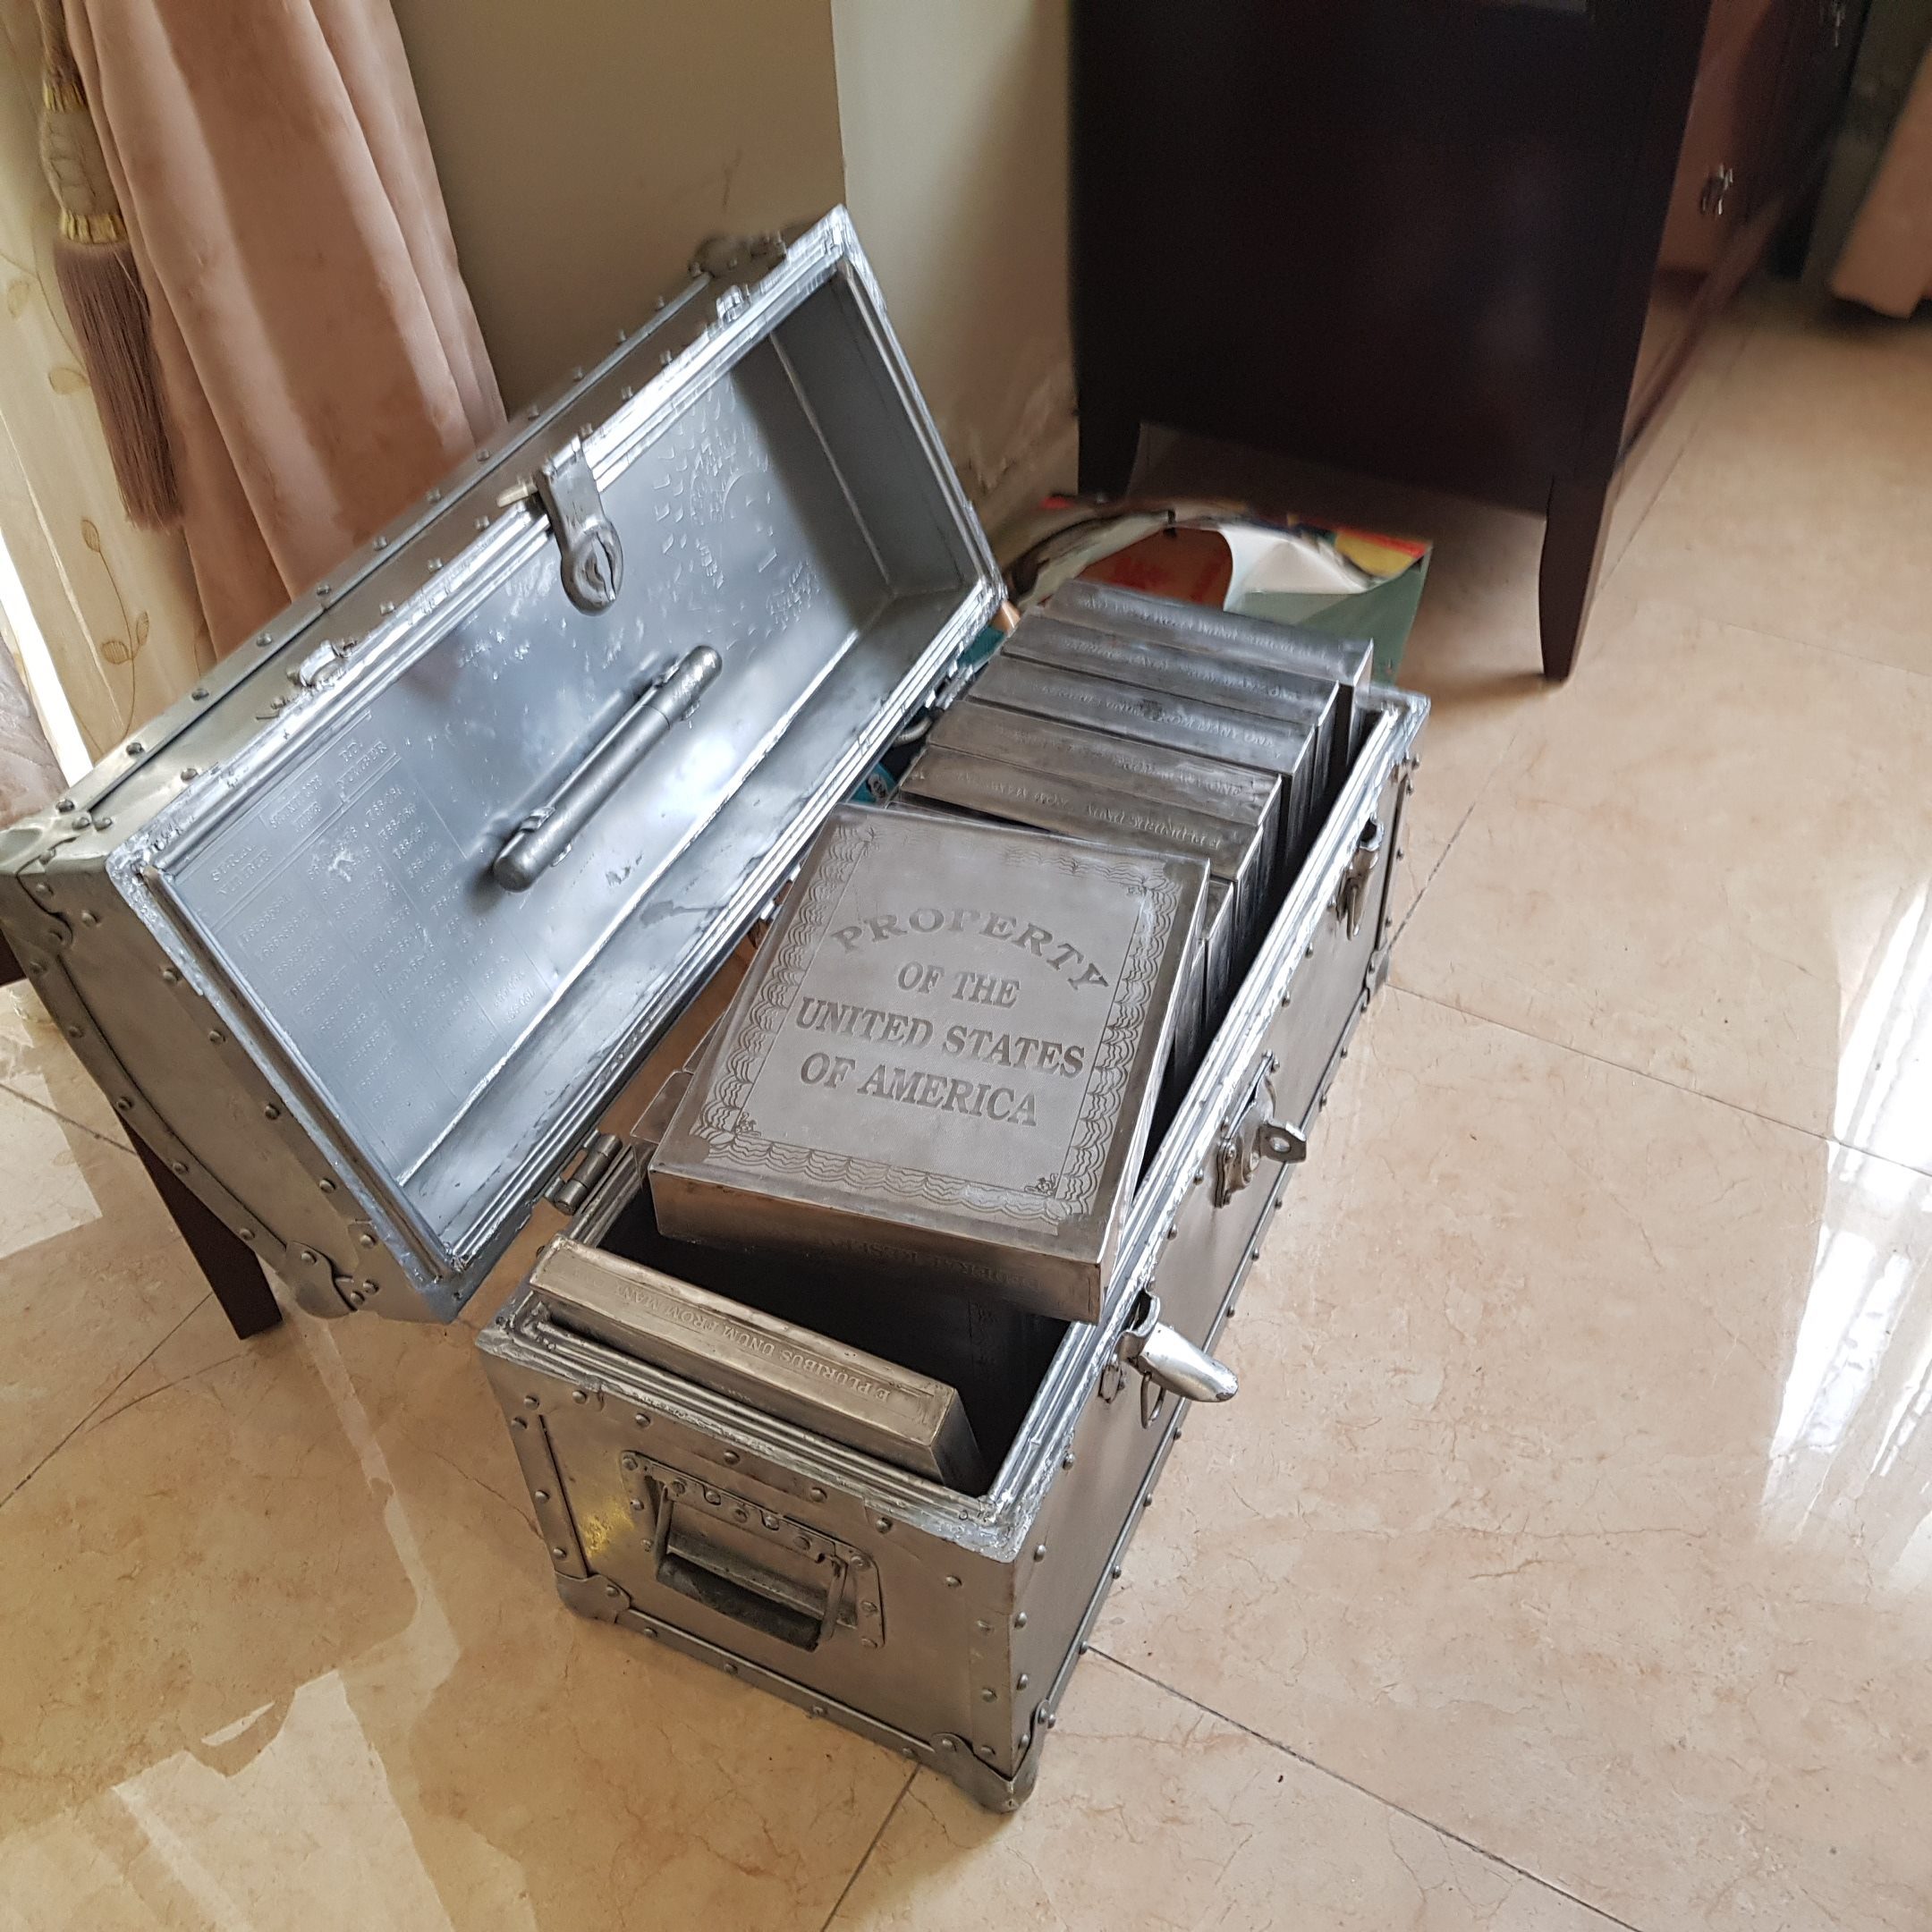 'INTERNATIONAL TREATIES.' The metal chest that allegedly contains treaties entered into by the United States with other countries and other classified documents. Contributed photo  